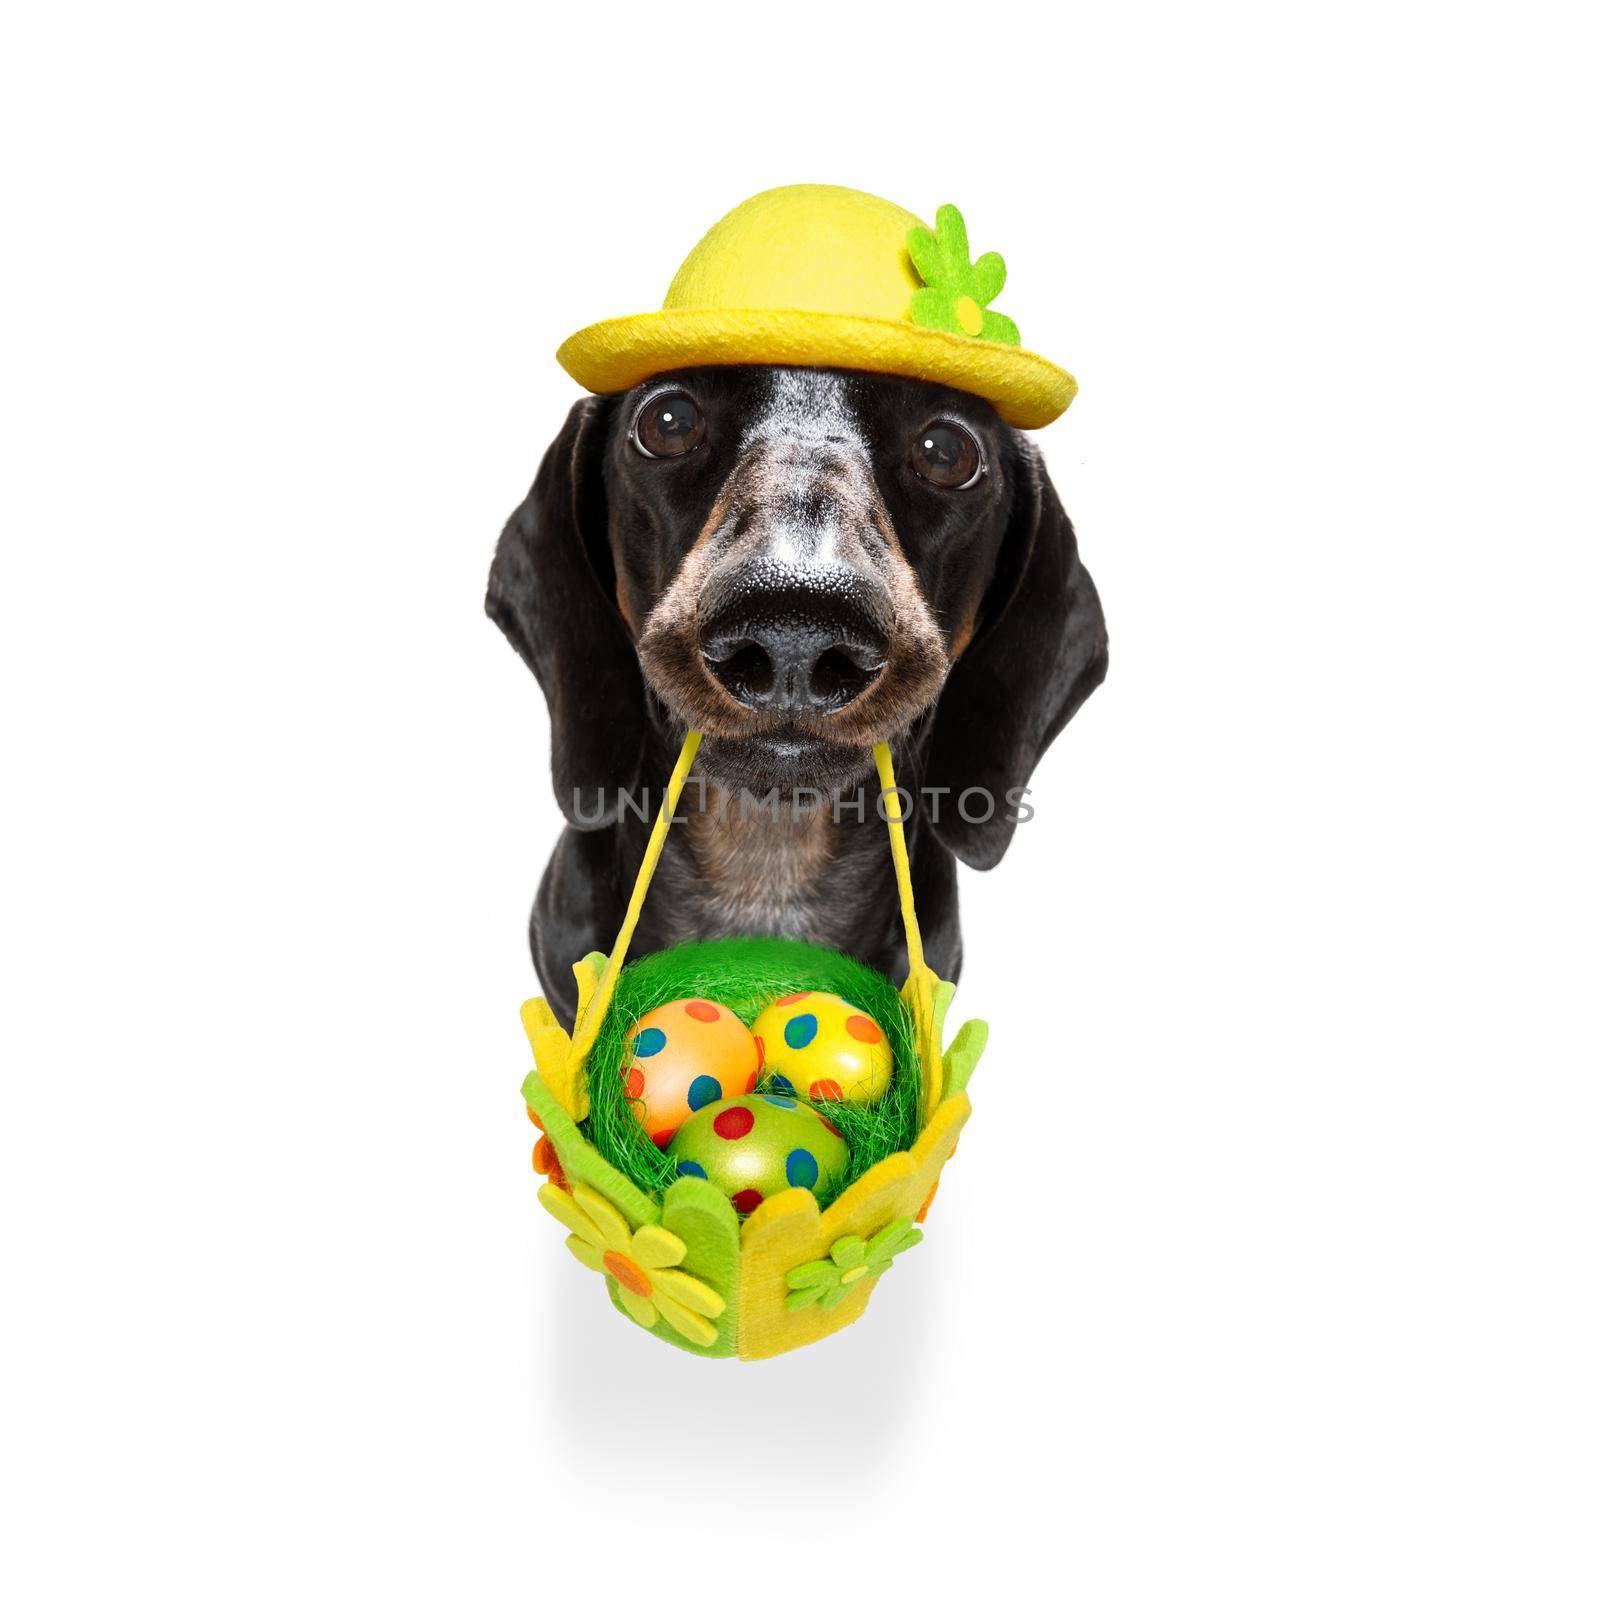 happy easter  dachshund sausage  dog with  funny colourful eggs in a basket   for the holiday season